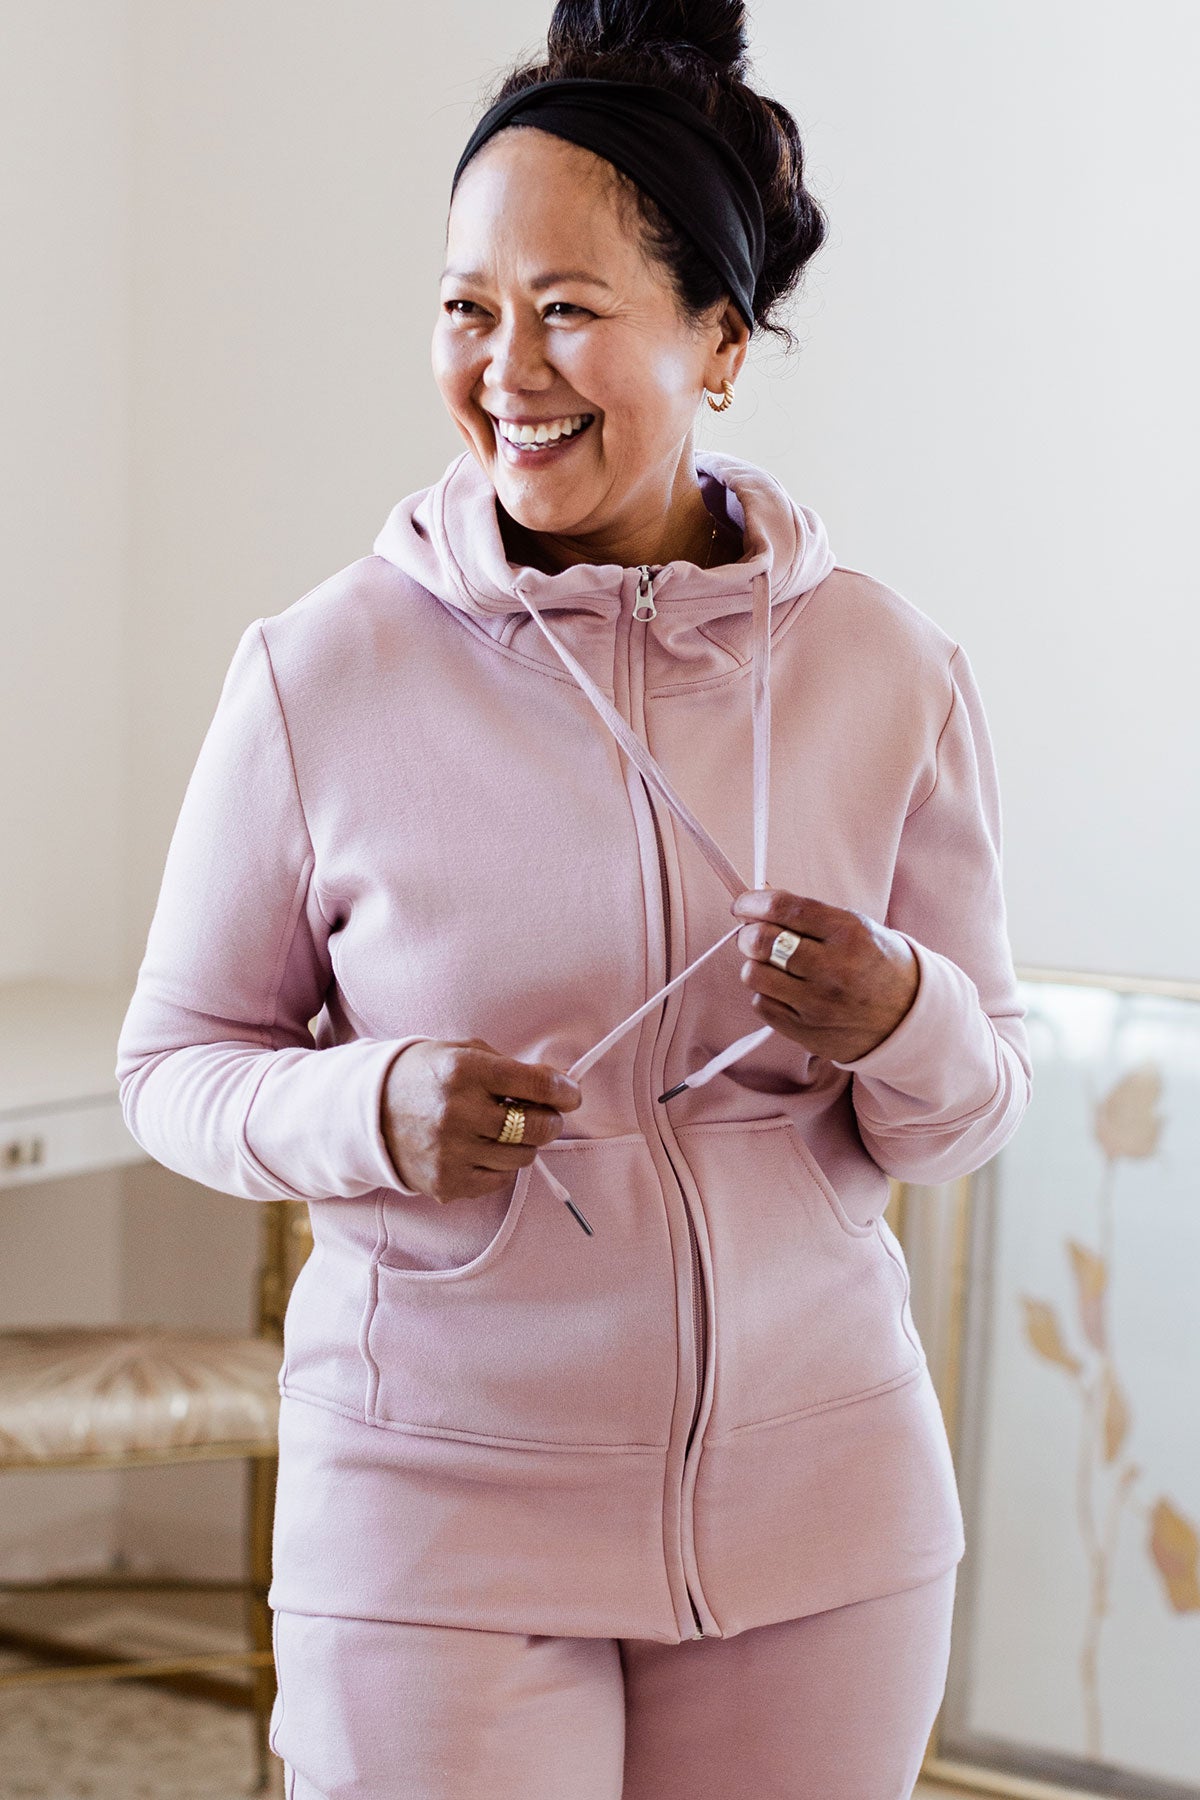 A woman standing and smiling while looking to the side, wearing Yala Scarlet Zip-Up Bamboo and Organic Cotton Hooded Jacket Sweatshirt in Lotus Pink